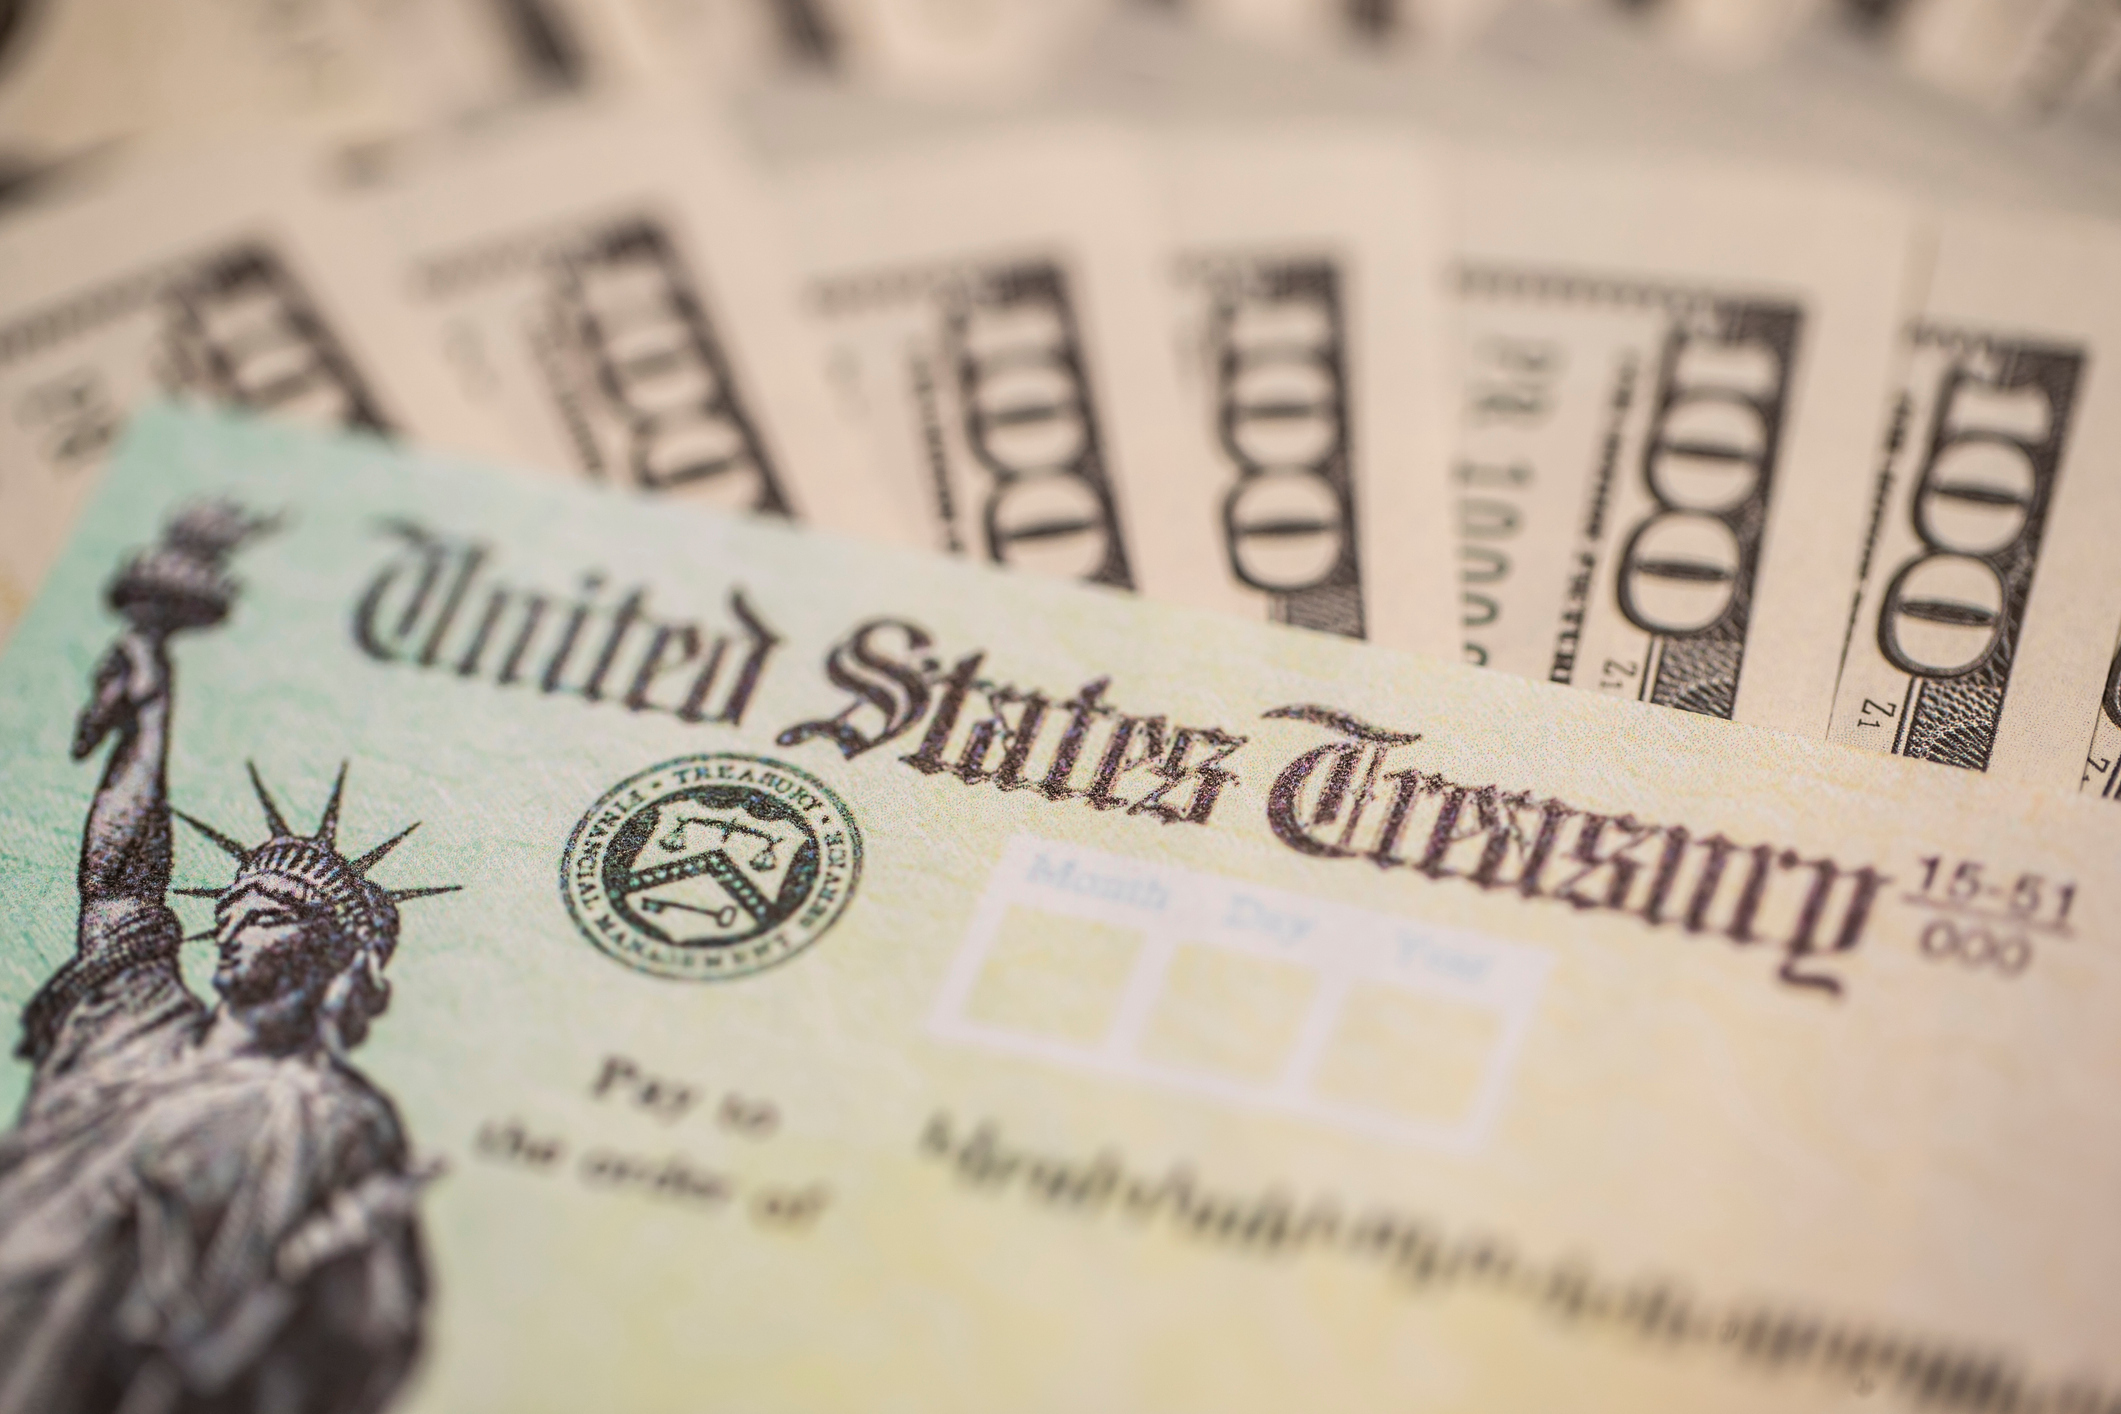 Stimulus Checks to be extended to adult dependents including college students